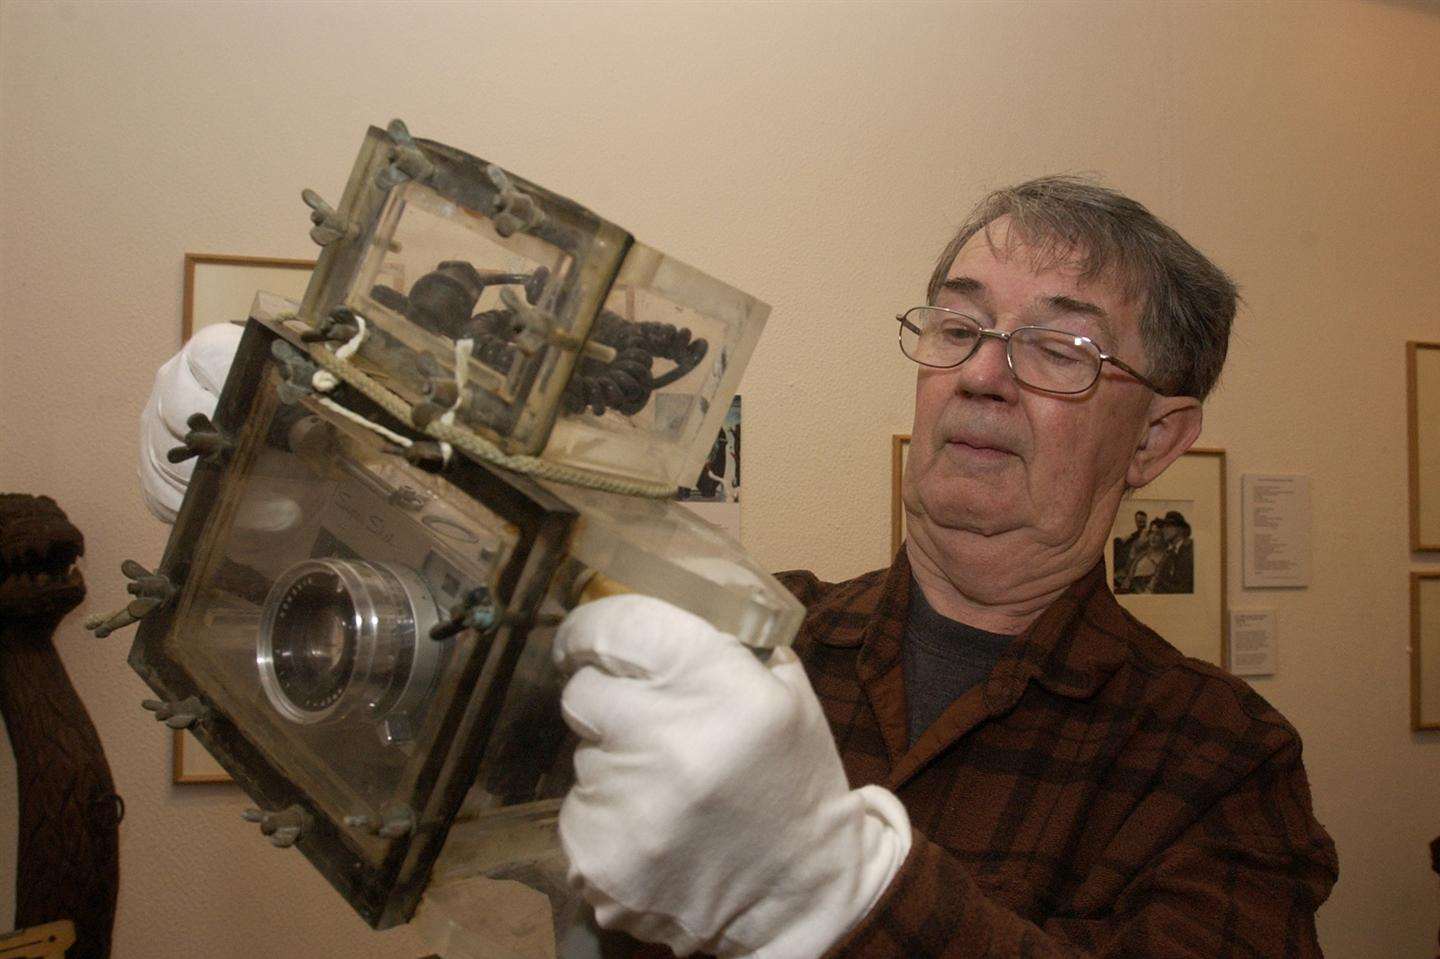 Don inspects a camera at Whitstable Museum in 2005